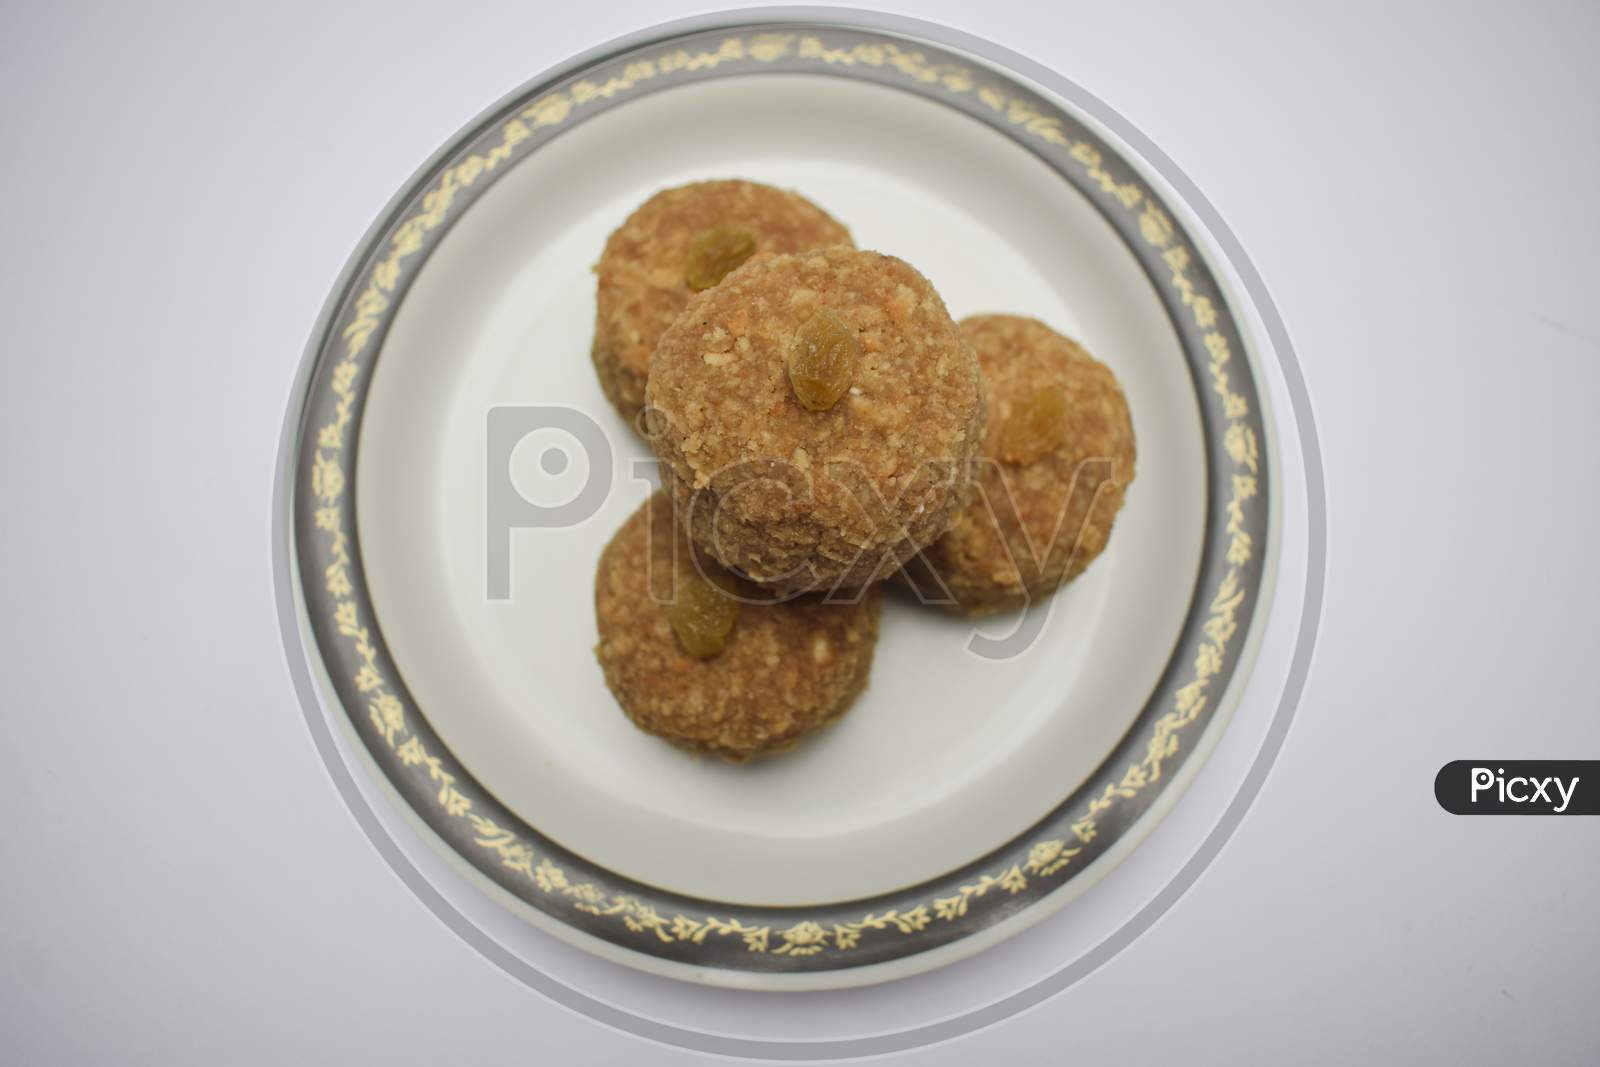 Home Cooked Indian Sweet Dish Laddu, Ladoo Made Of Wheat Flour And Clarified Butter Ghee Served In Plate During Indian Festivals Like Ganesh Chaturthi Prashad Garnished With Raisin